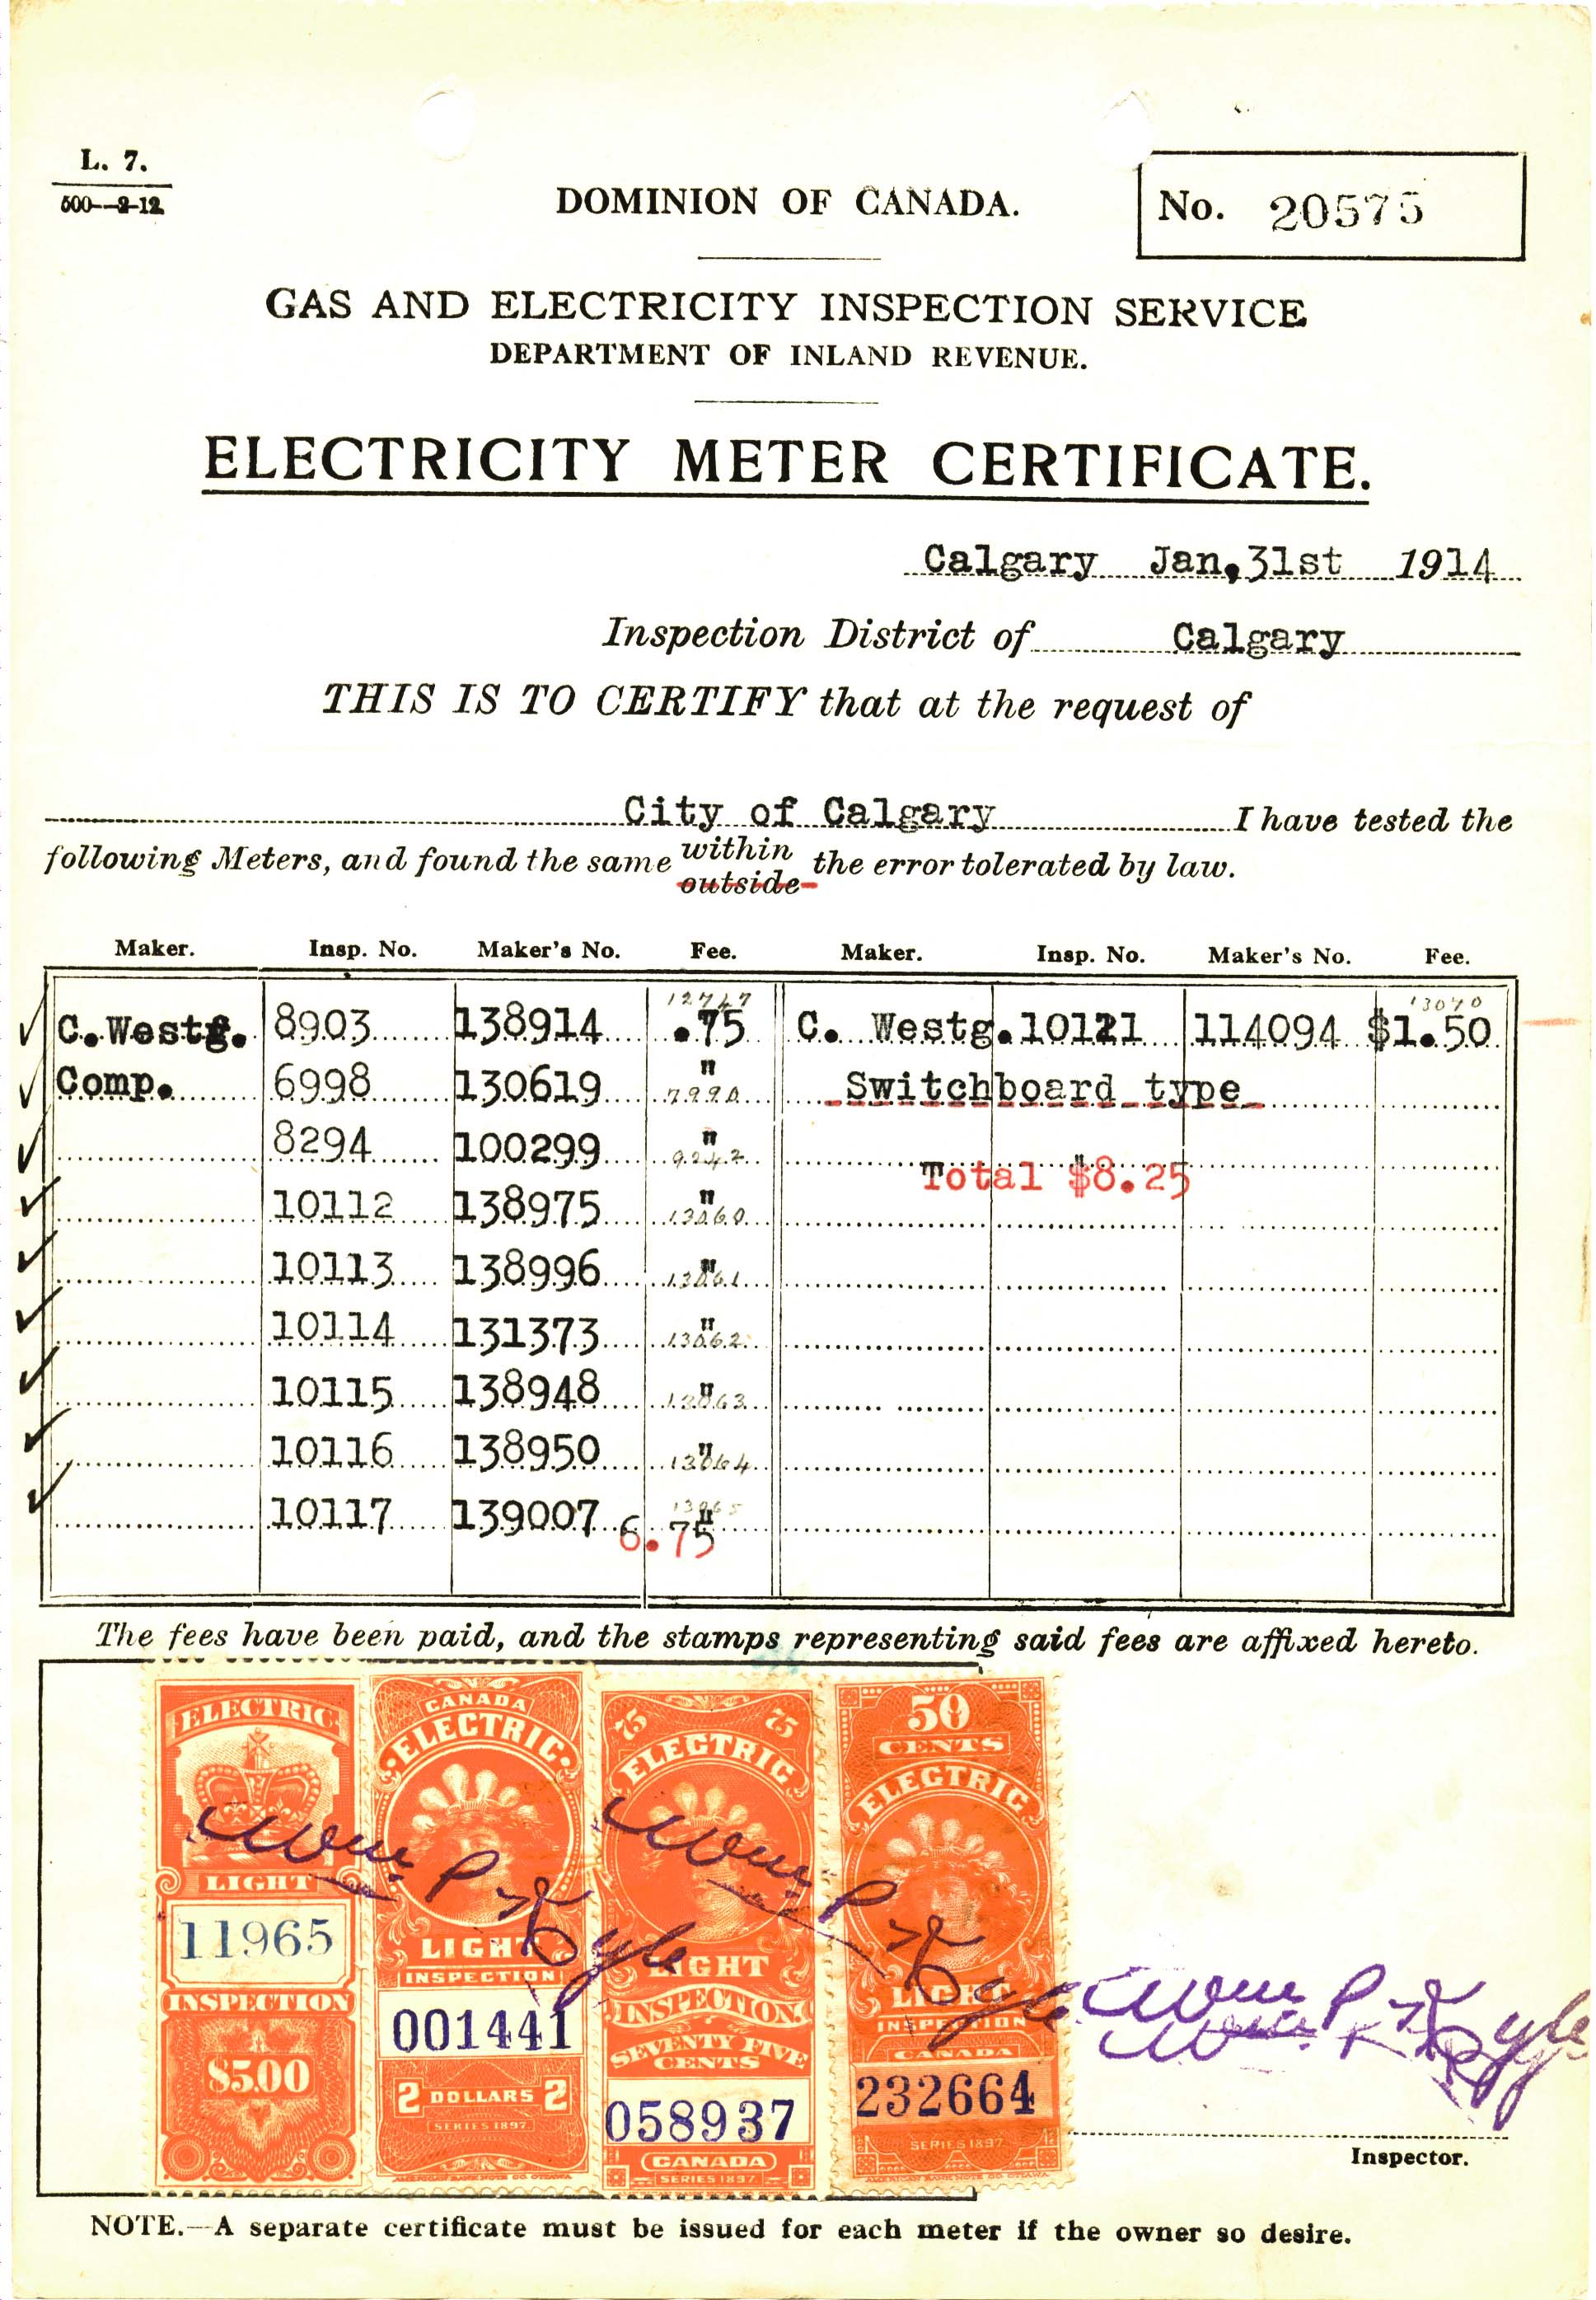 Electric Light Inspection stamps affixed to an Electricity Meter Certificate